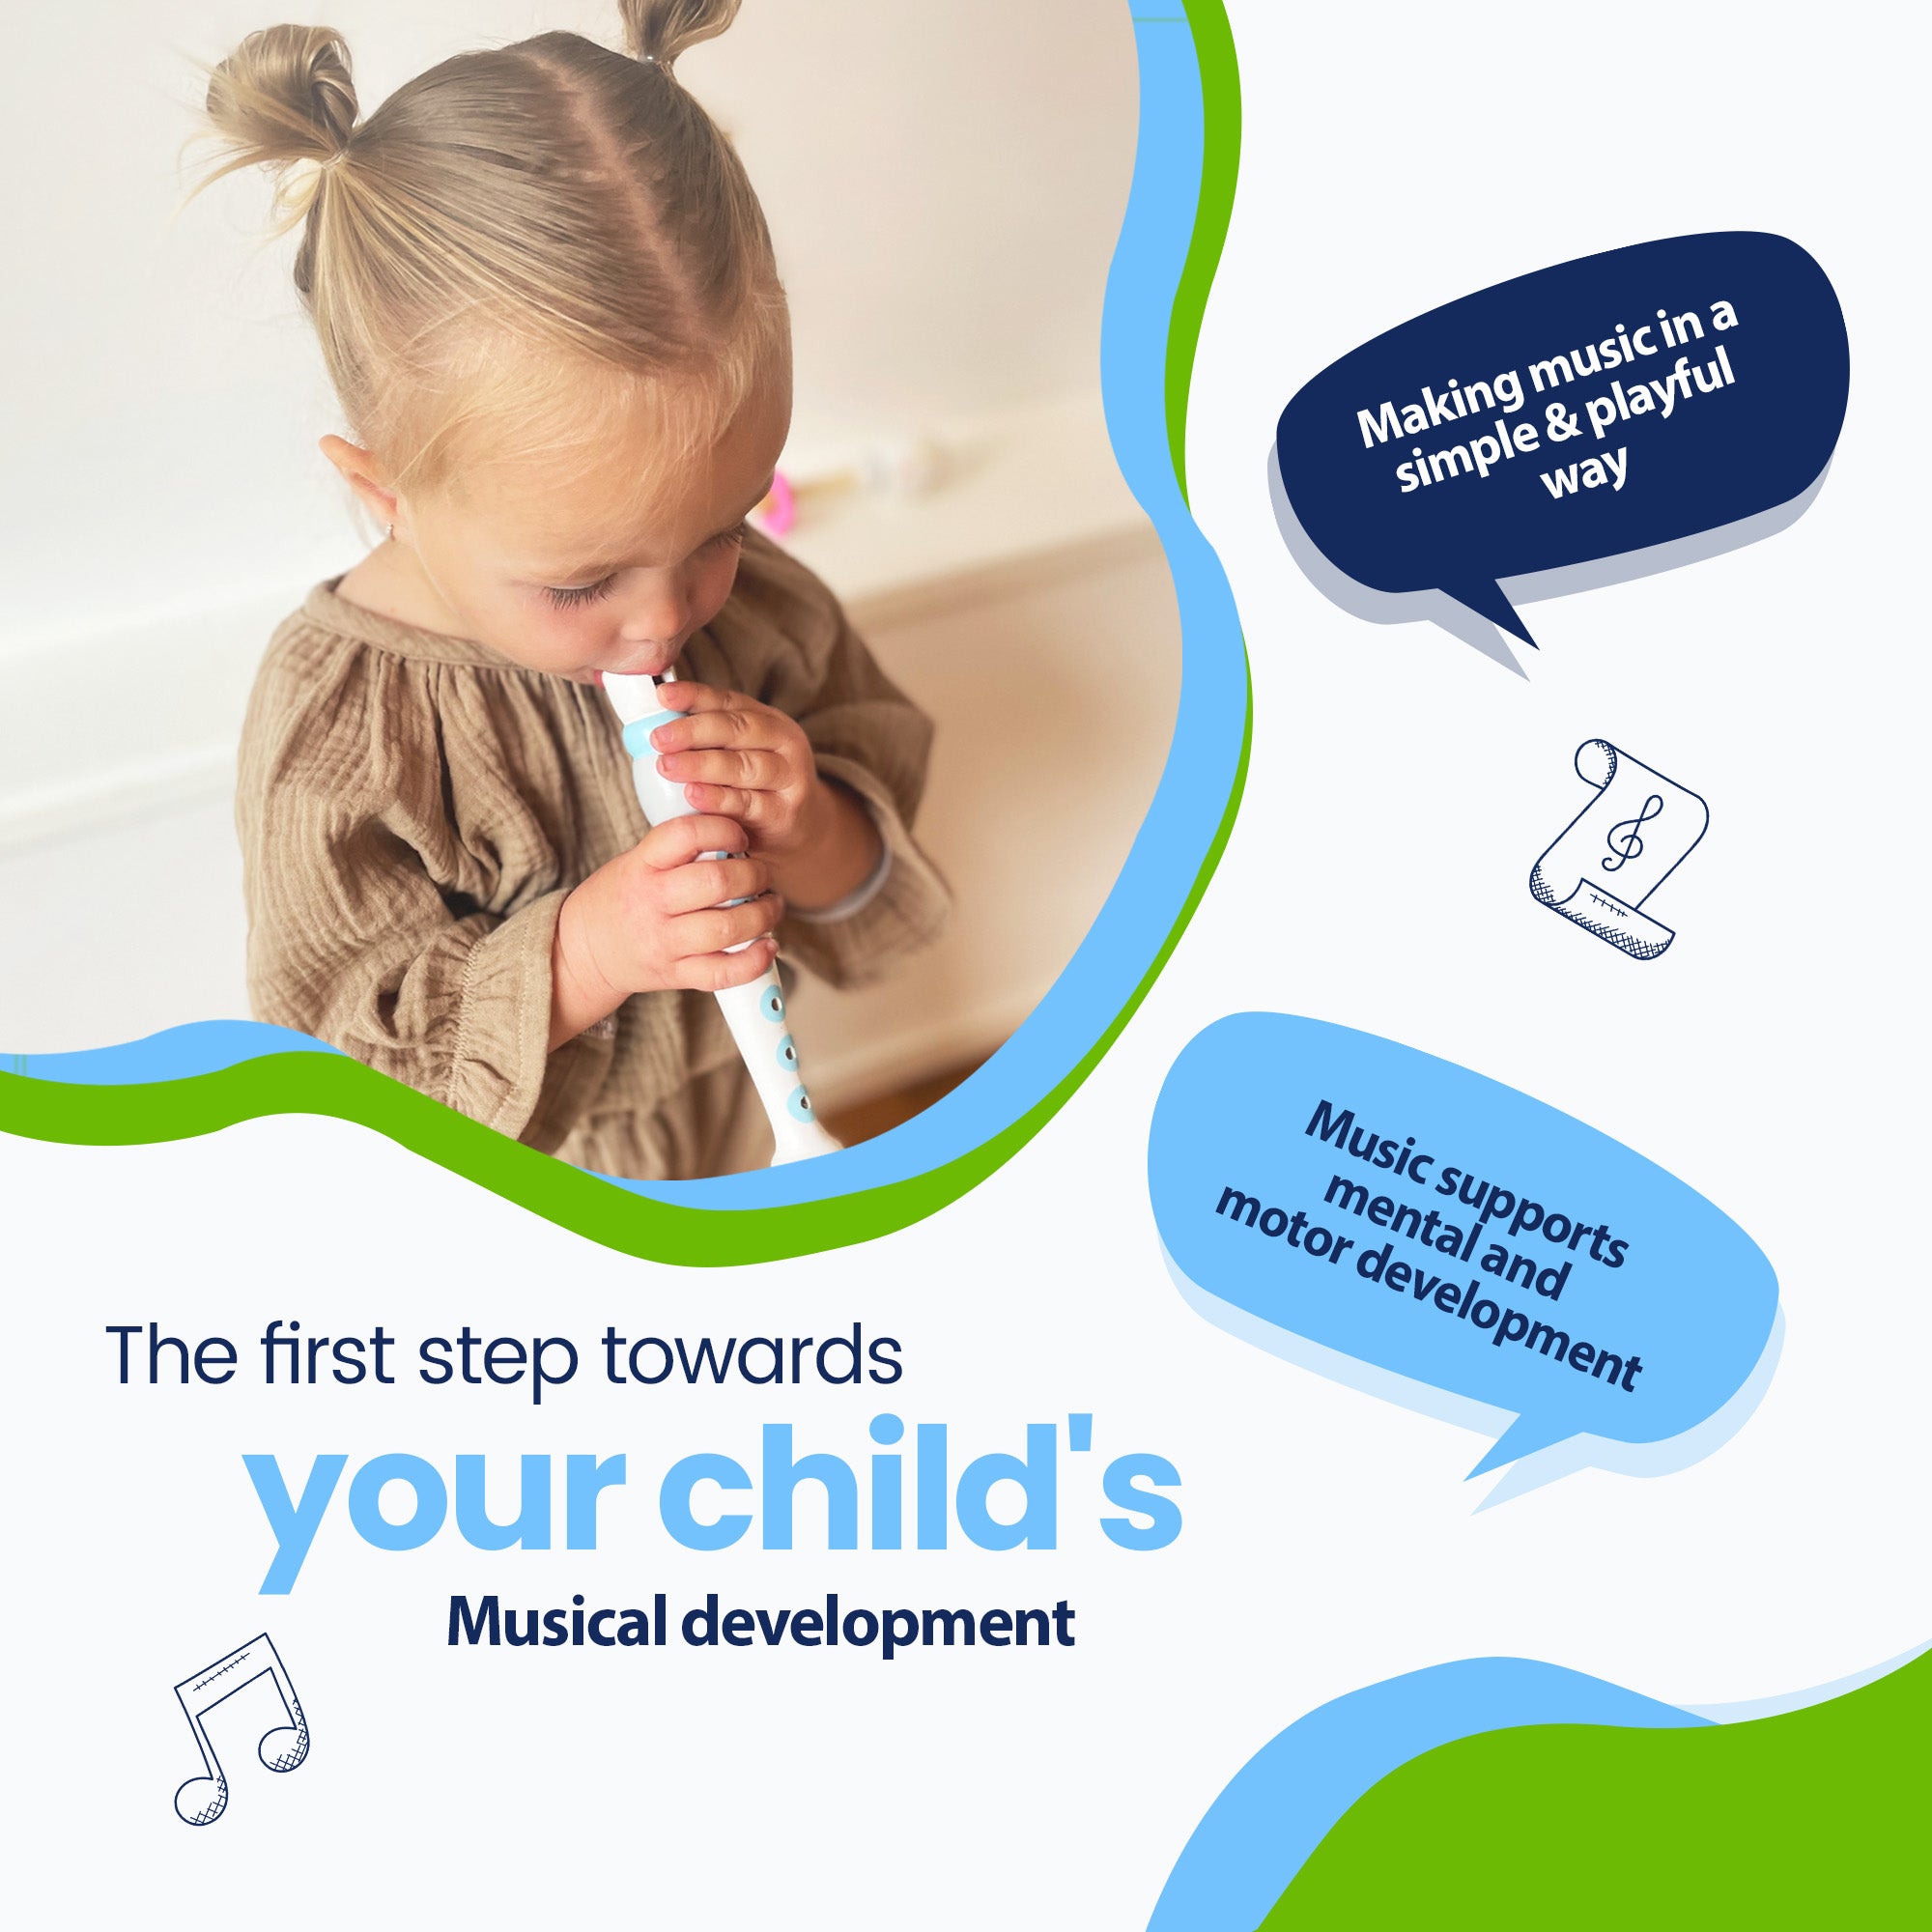 The first step towards your child's musical development - Making music in a simple and playful way - Music supports mental and motor development